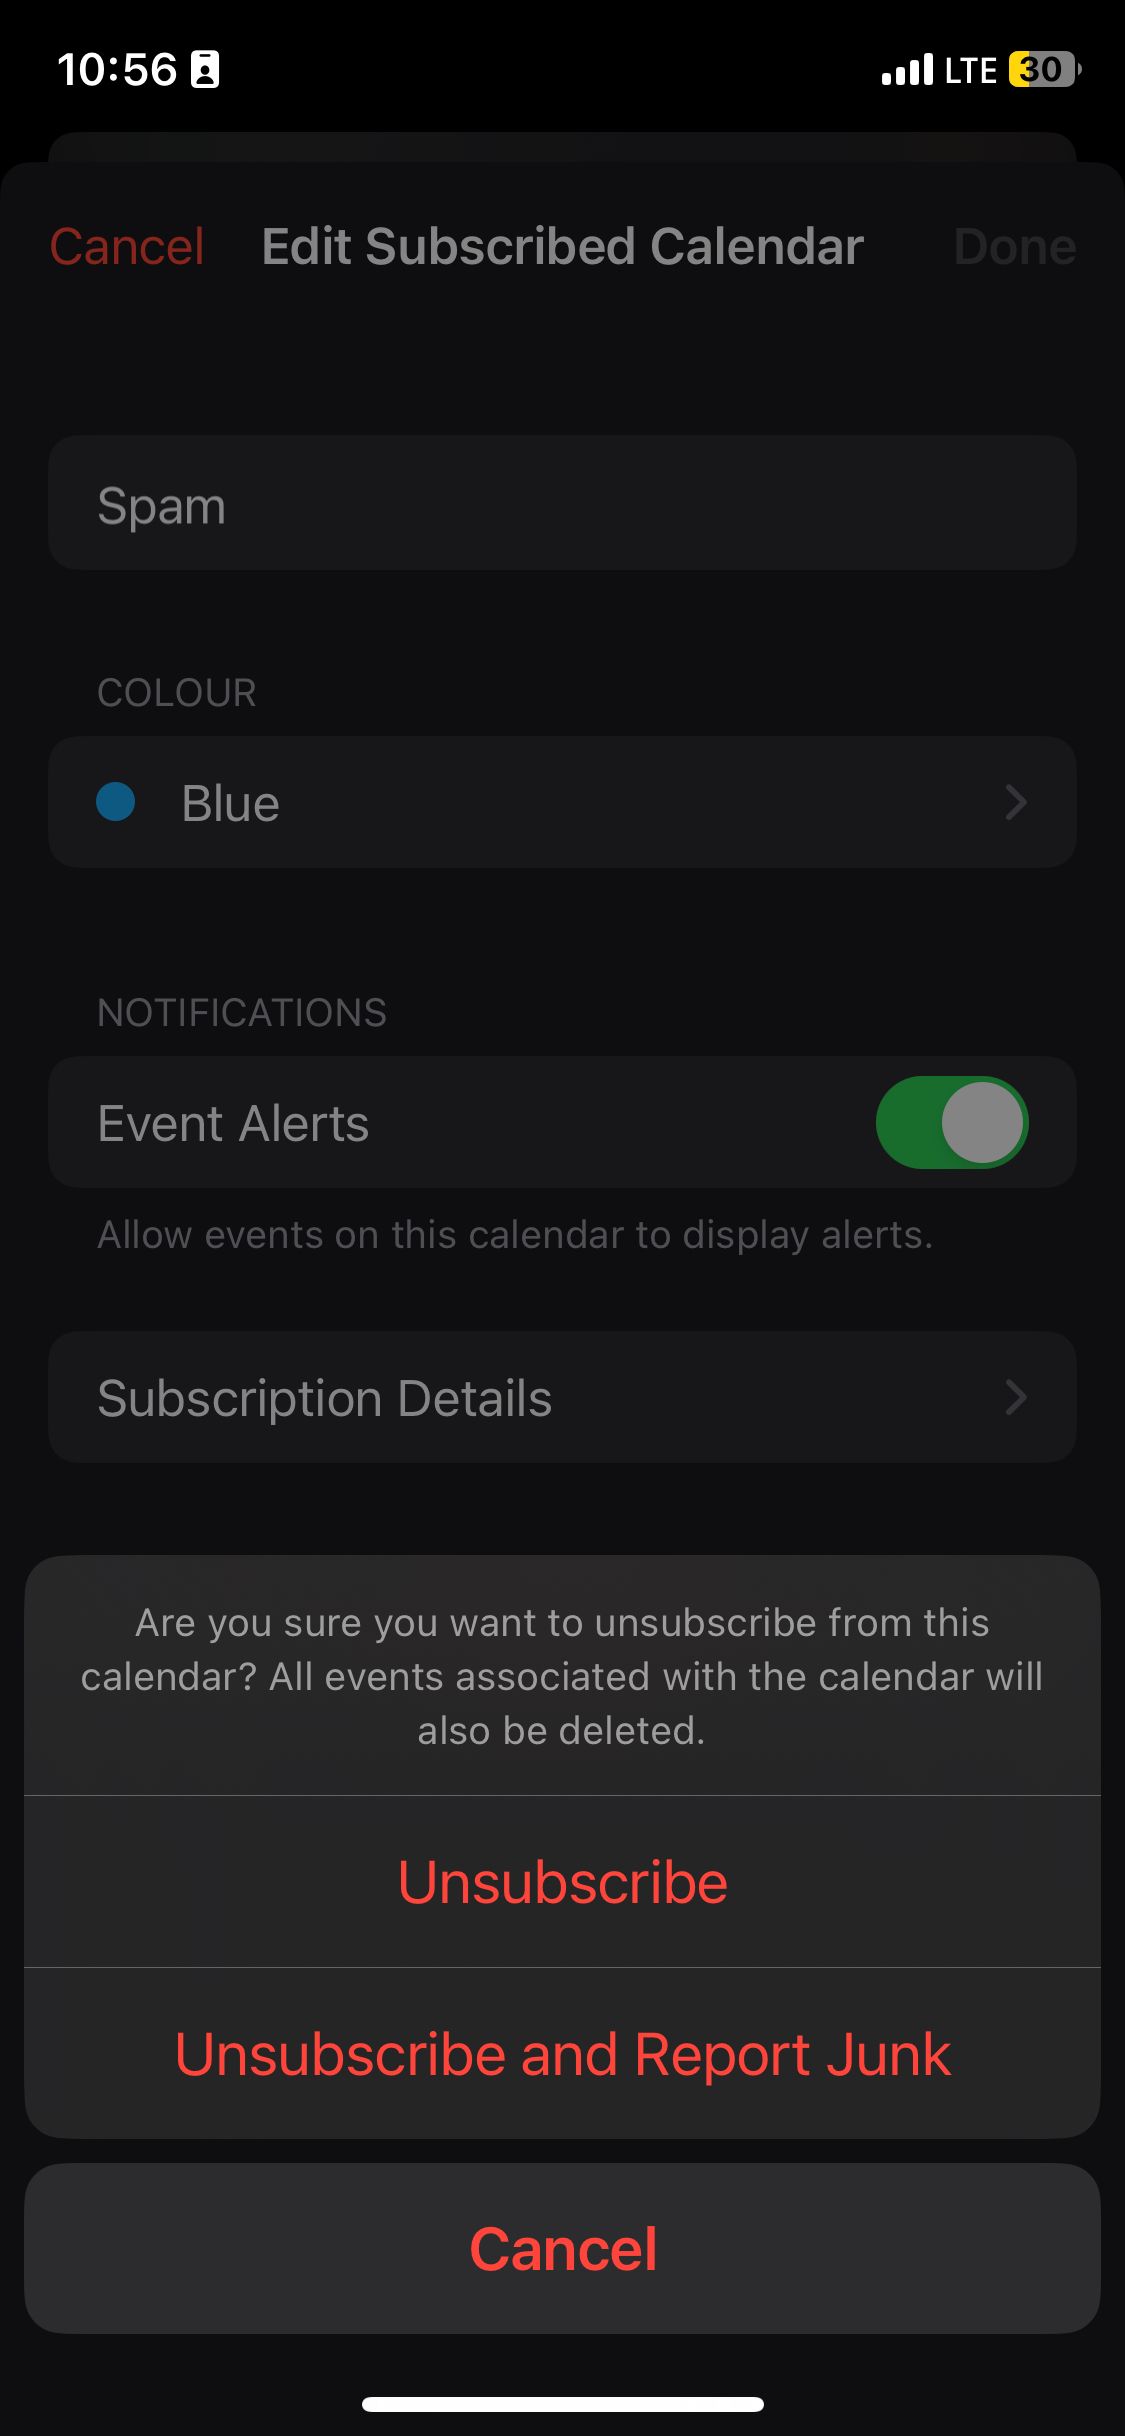 Unsubscribe from calendar options in the iPhone Calendars app